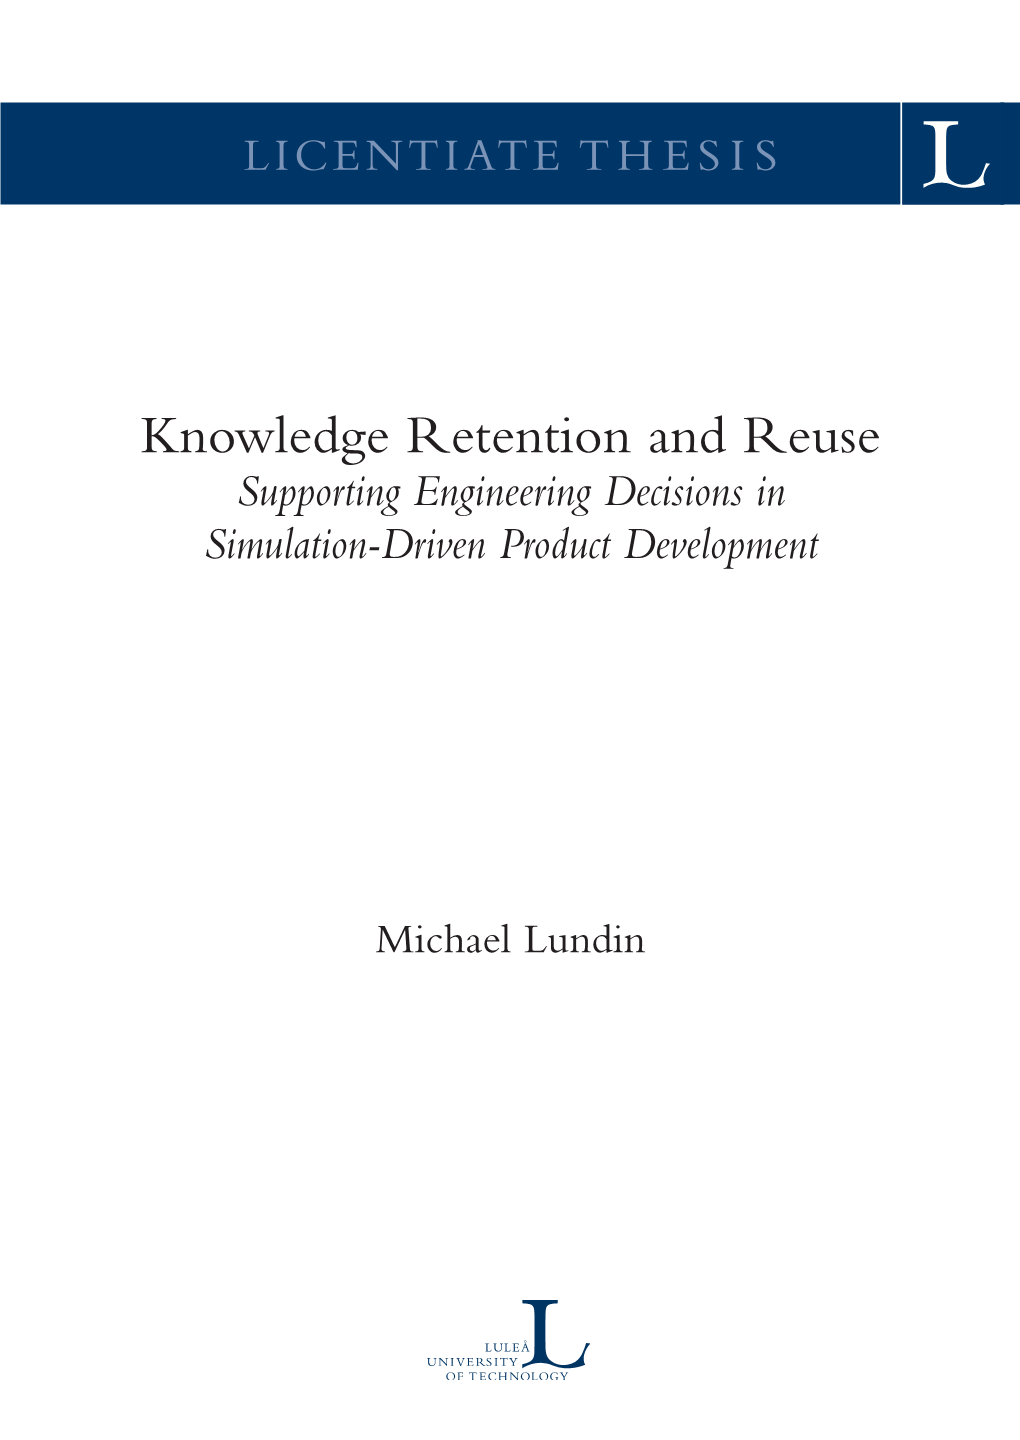 Knowledge Retention and Reuse and Knowledgeretention Lundin Michael